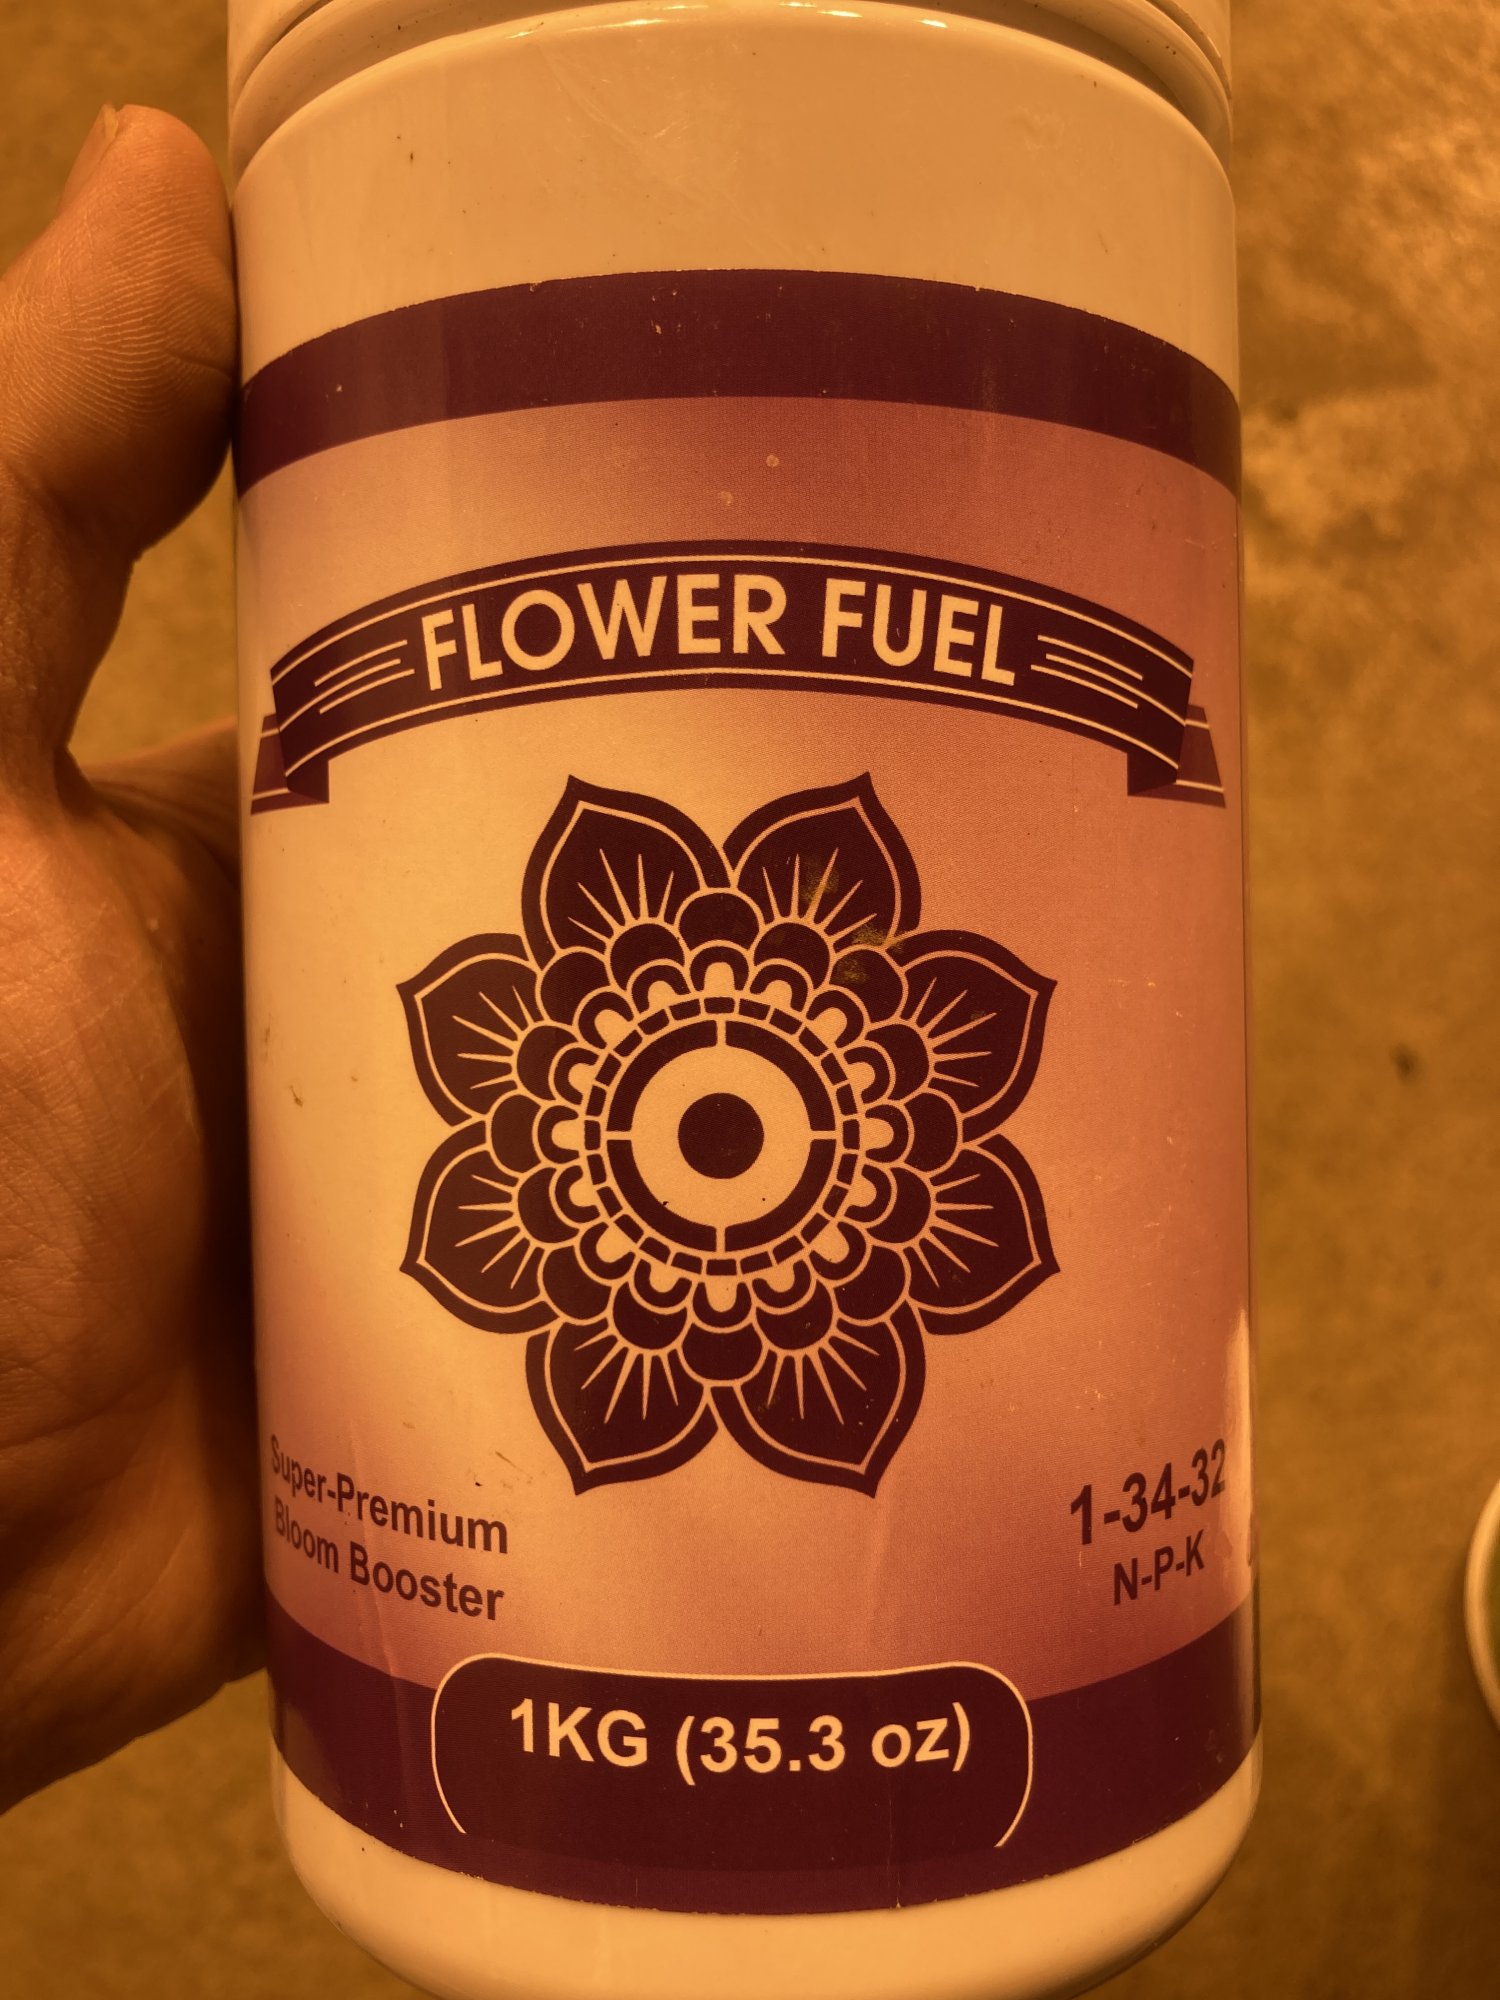 Has anyone used flower fuel before thoughts